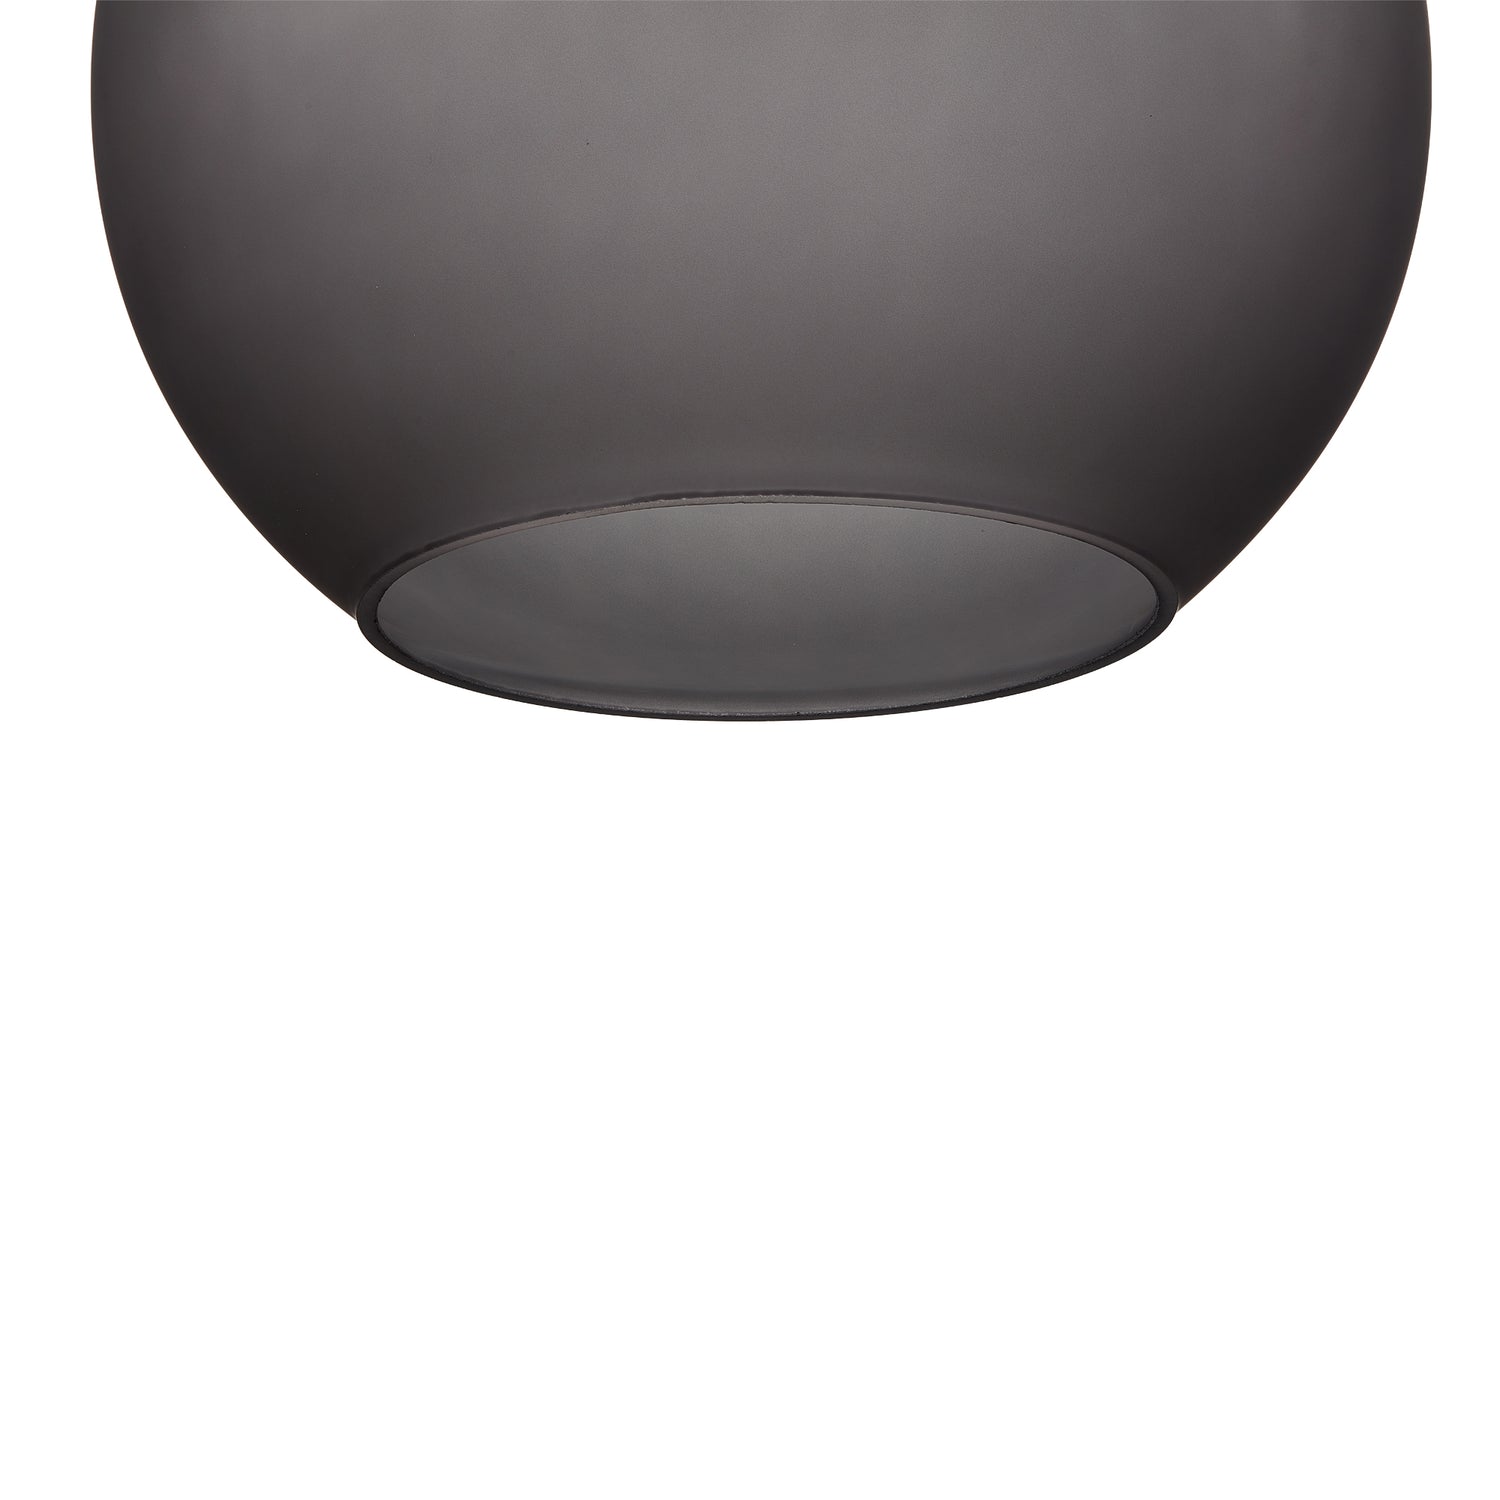 What sets our Carro Home Helos Collection apart from all the rest is in the details: an understated, yet elegant sphere shaped glass shade and its clean lined metal fixture. Helos suits any room that need a significant accent without overwhelming by its presence.